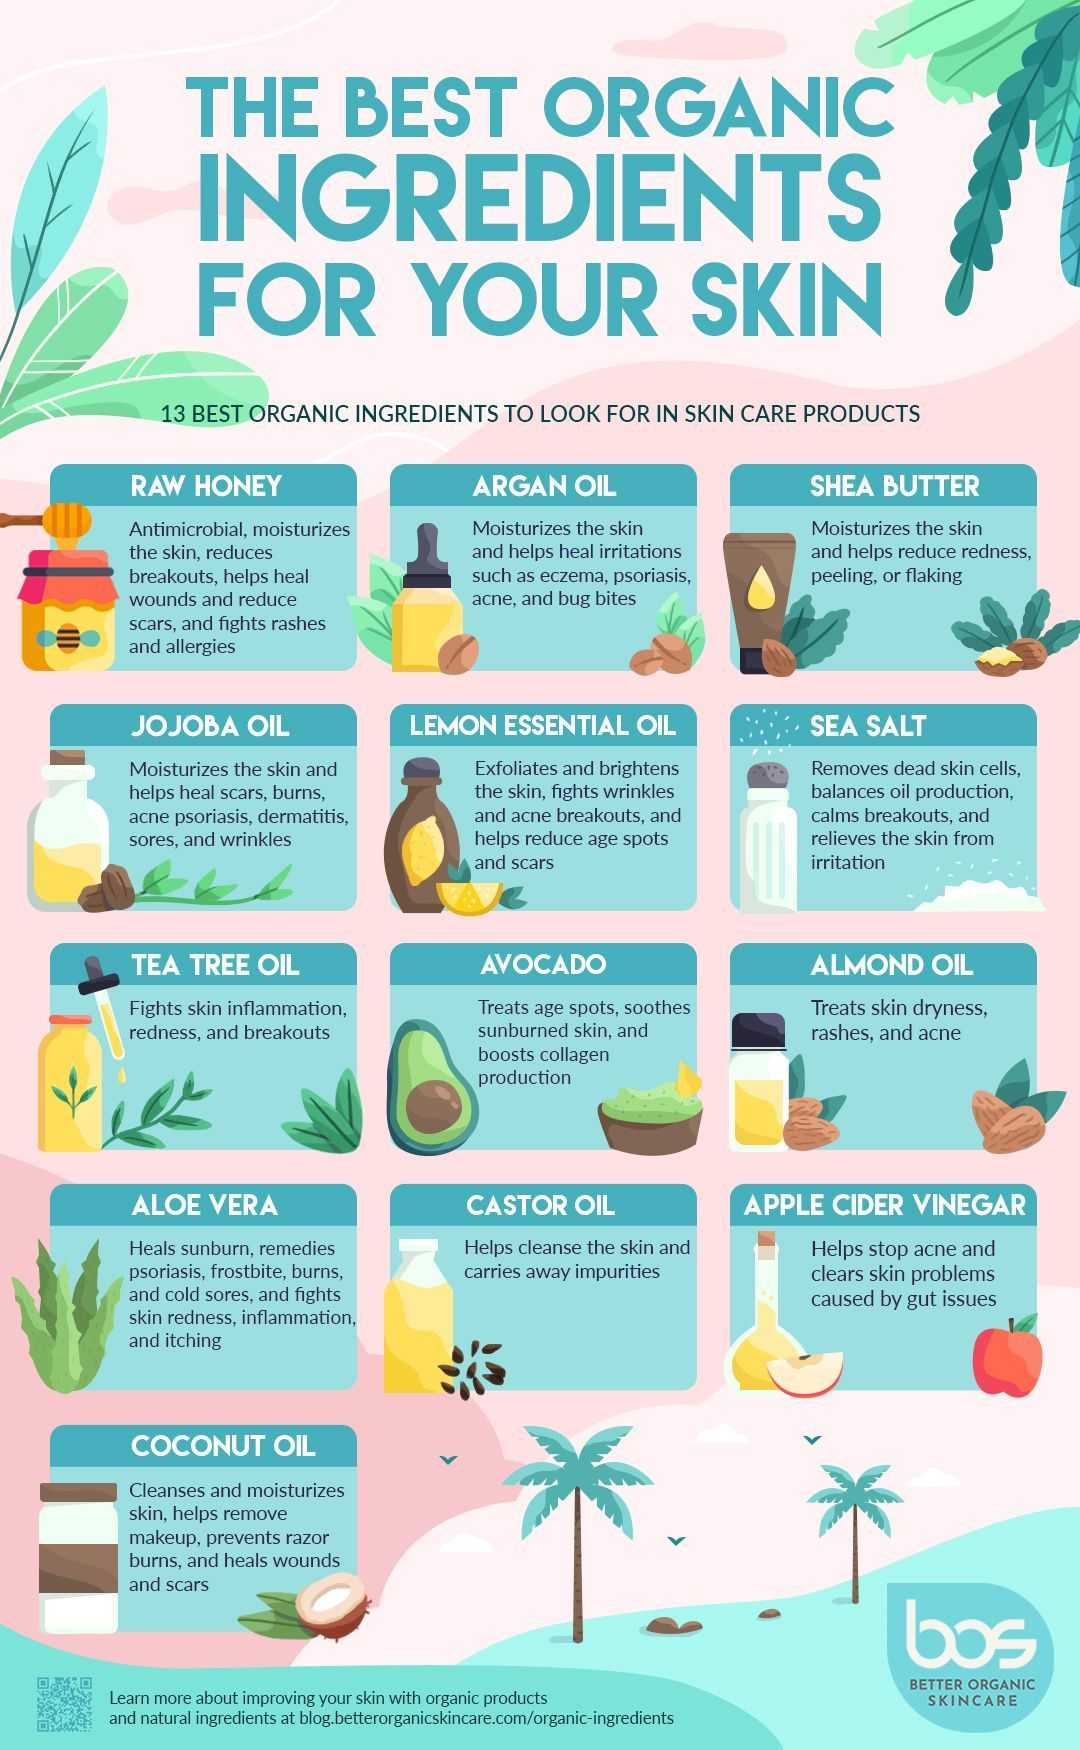 The Best Organic Ingredients For Your Skin